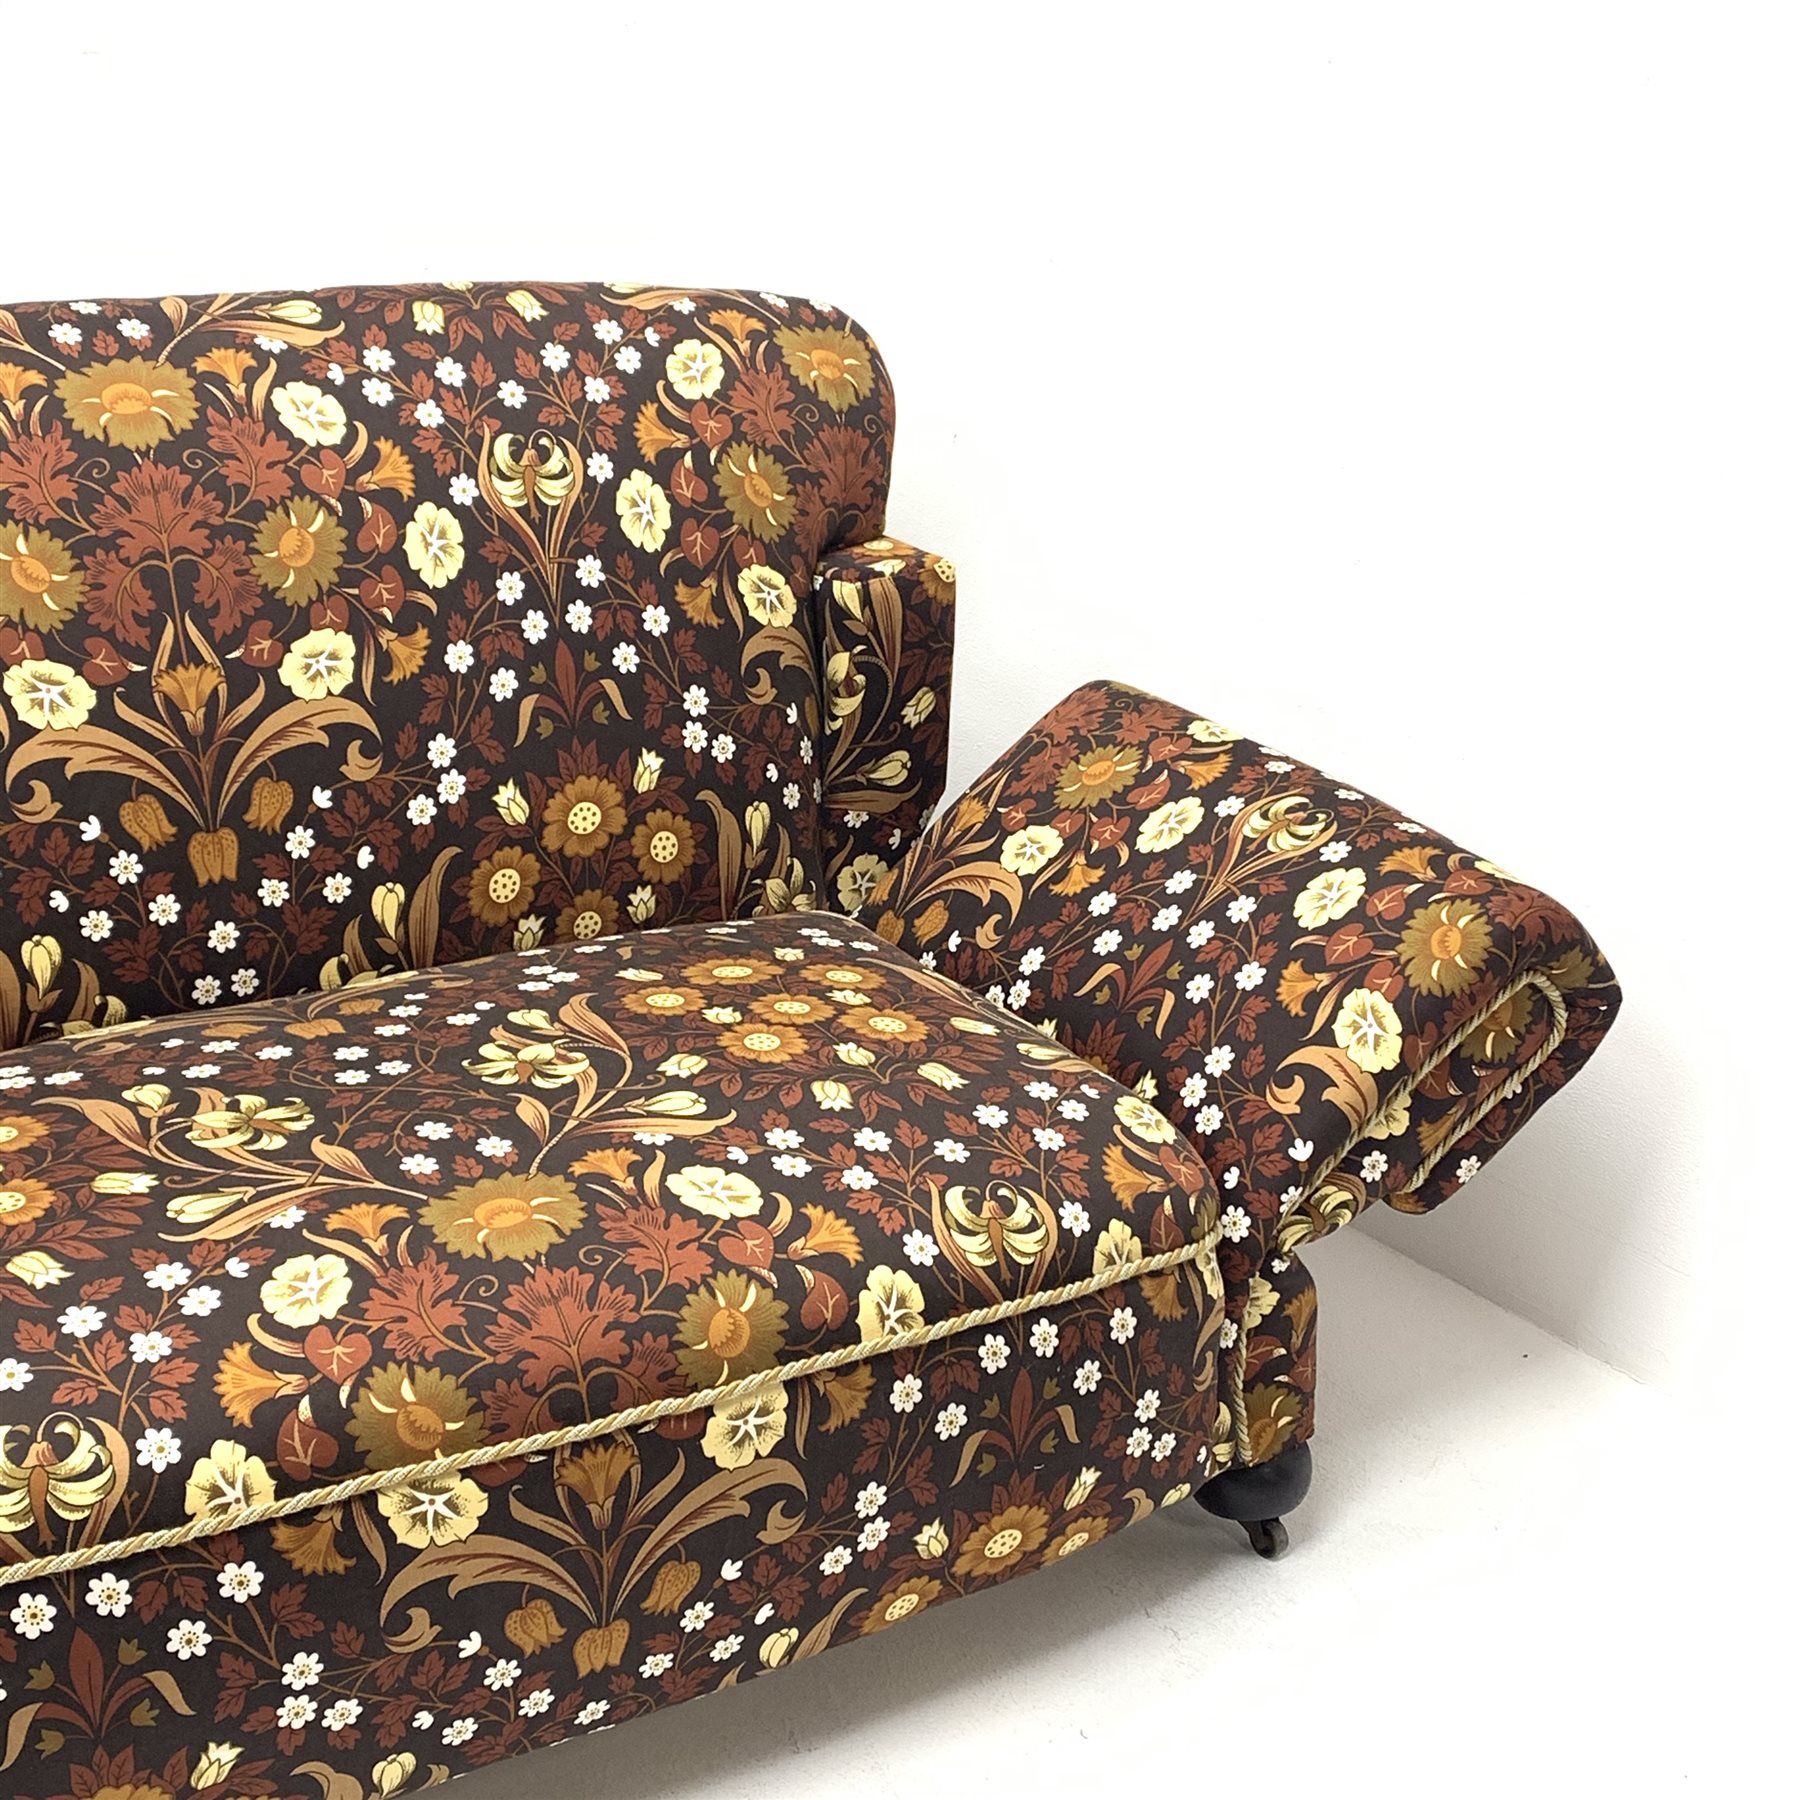 Early 20th century two seat drop end settee upholstered in Willam Morris style patterned fabric, tur - Image 4 of 4